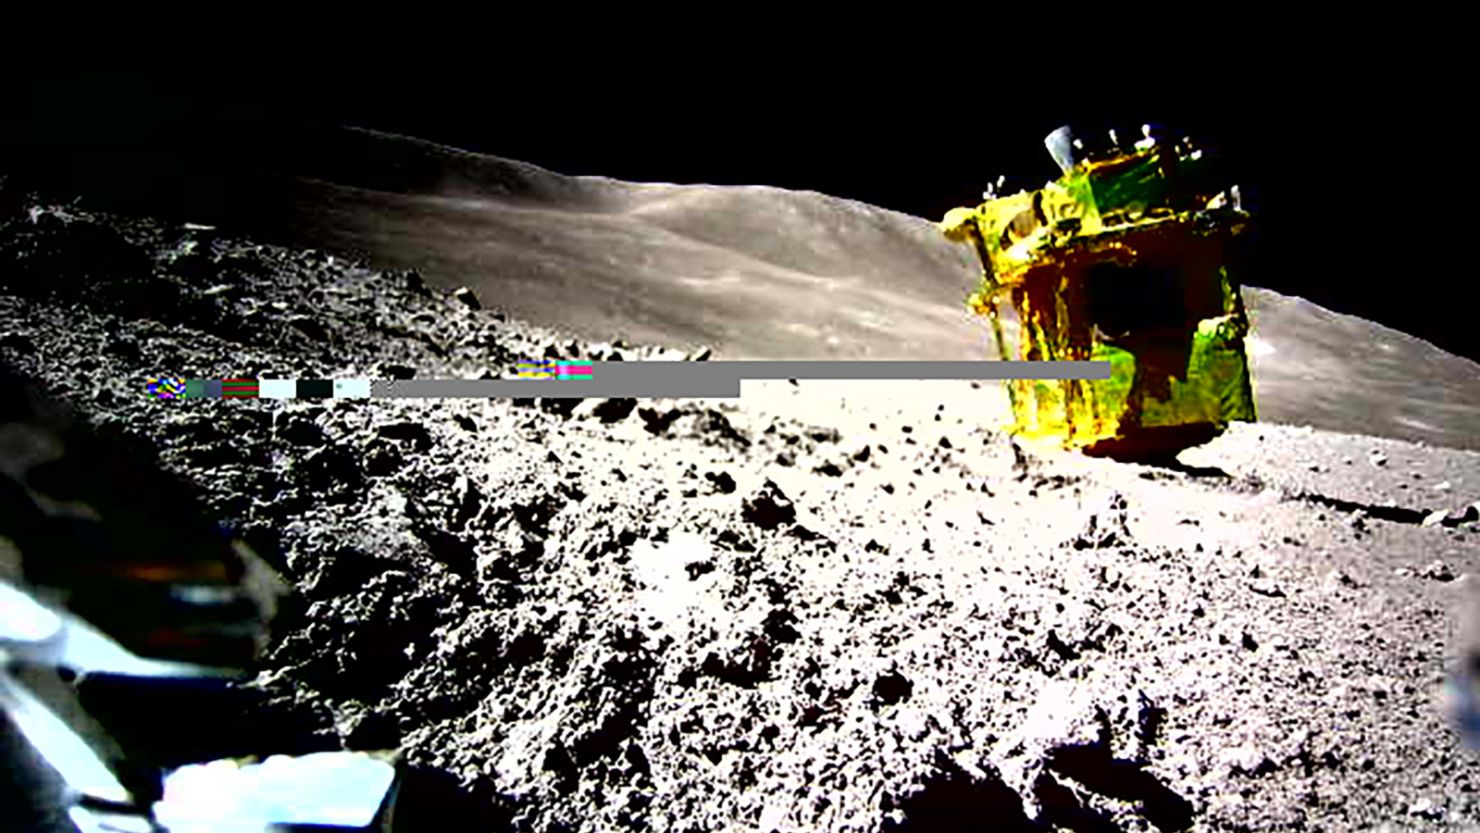 The Lunar Excursion Vehicle 2 (LEV-2 / SORA-Q) has successfully taken an image of the #SLIM spacecraft on the Moon. LEV-2 is the world's first robot to conduct fully autonomous exploration on the lunar surface.